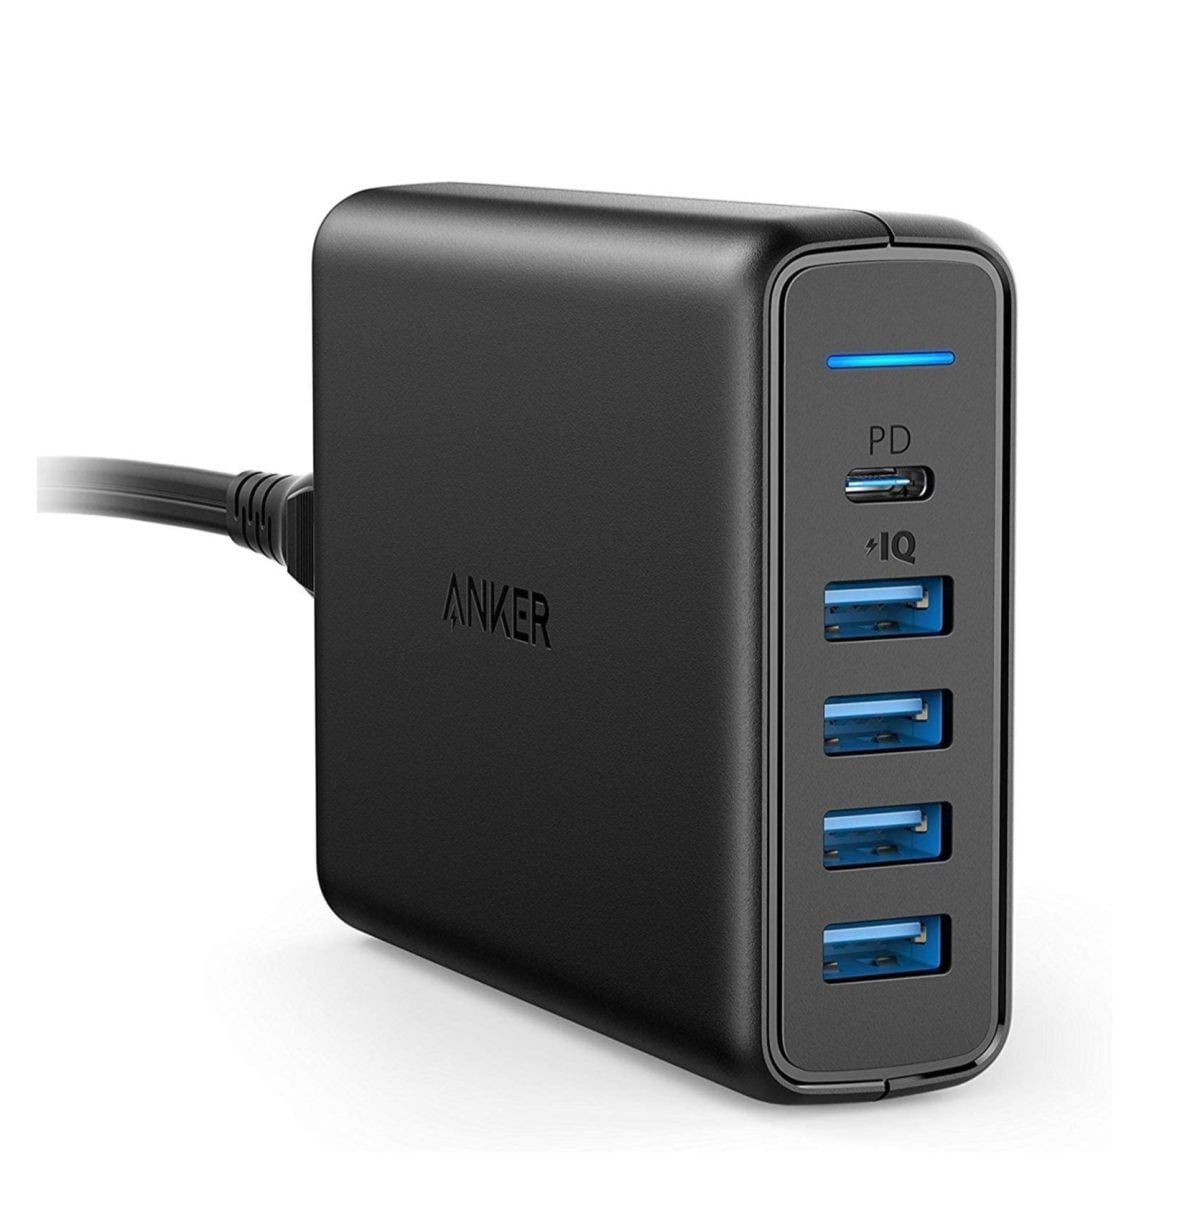 Anker Powerport I Pd With 1 Pd And 4 Piq B2B - Black A2056K11